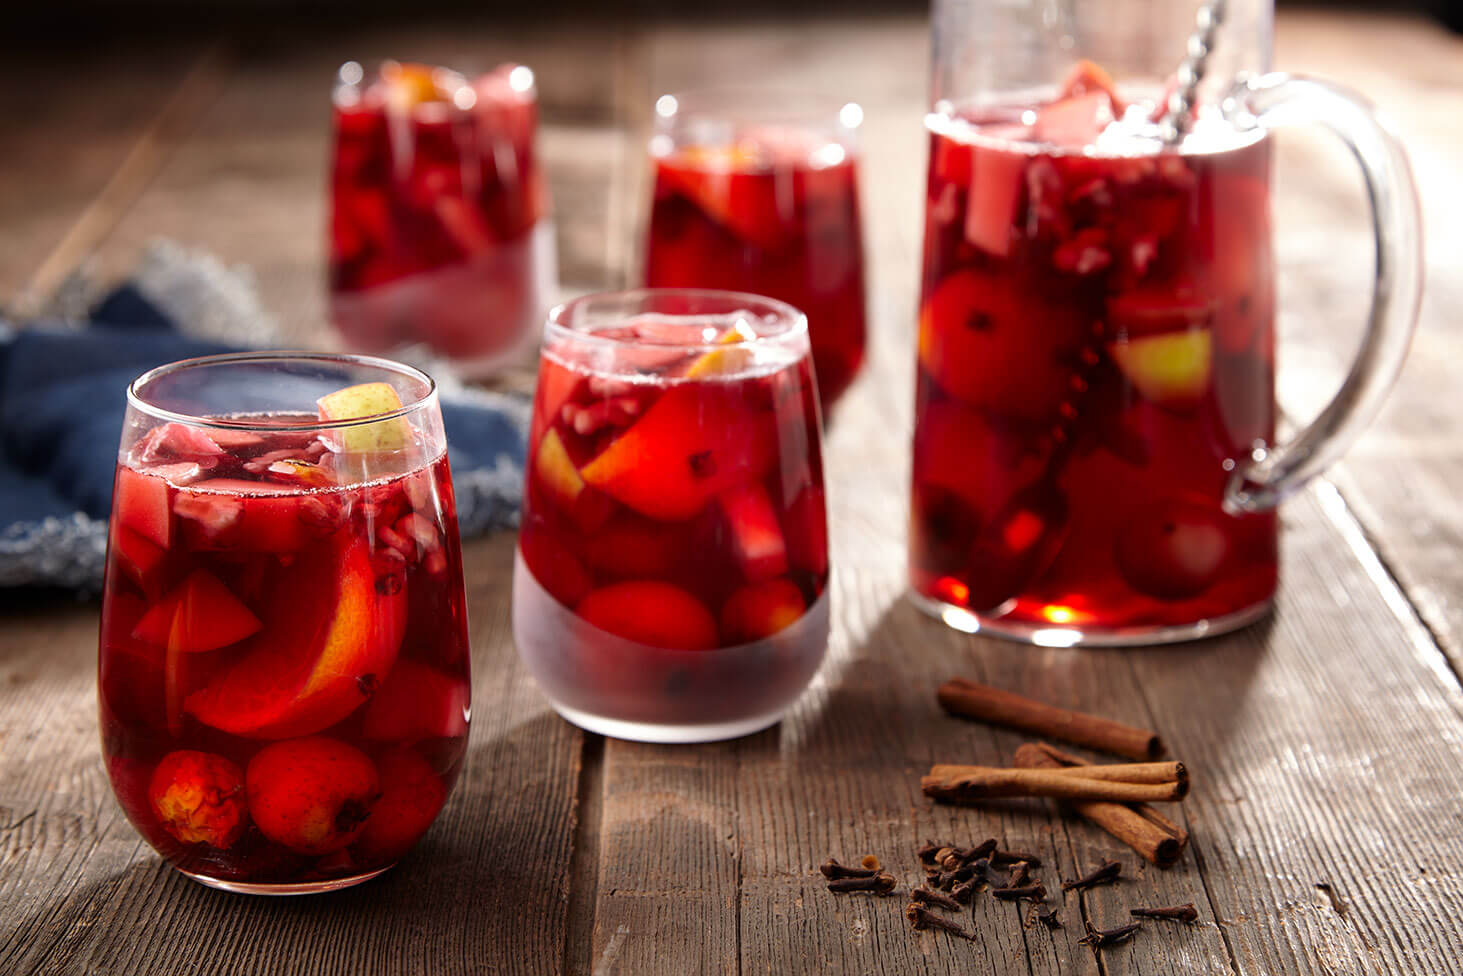 Desserts & Drinks: Ponche Navideño - Mexican Christmas Punch